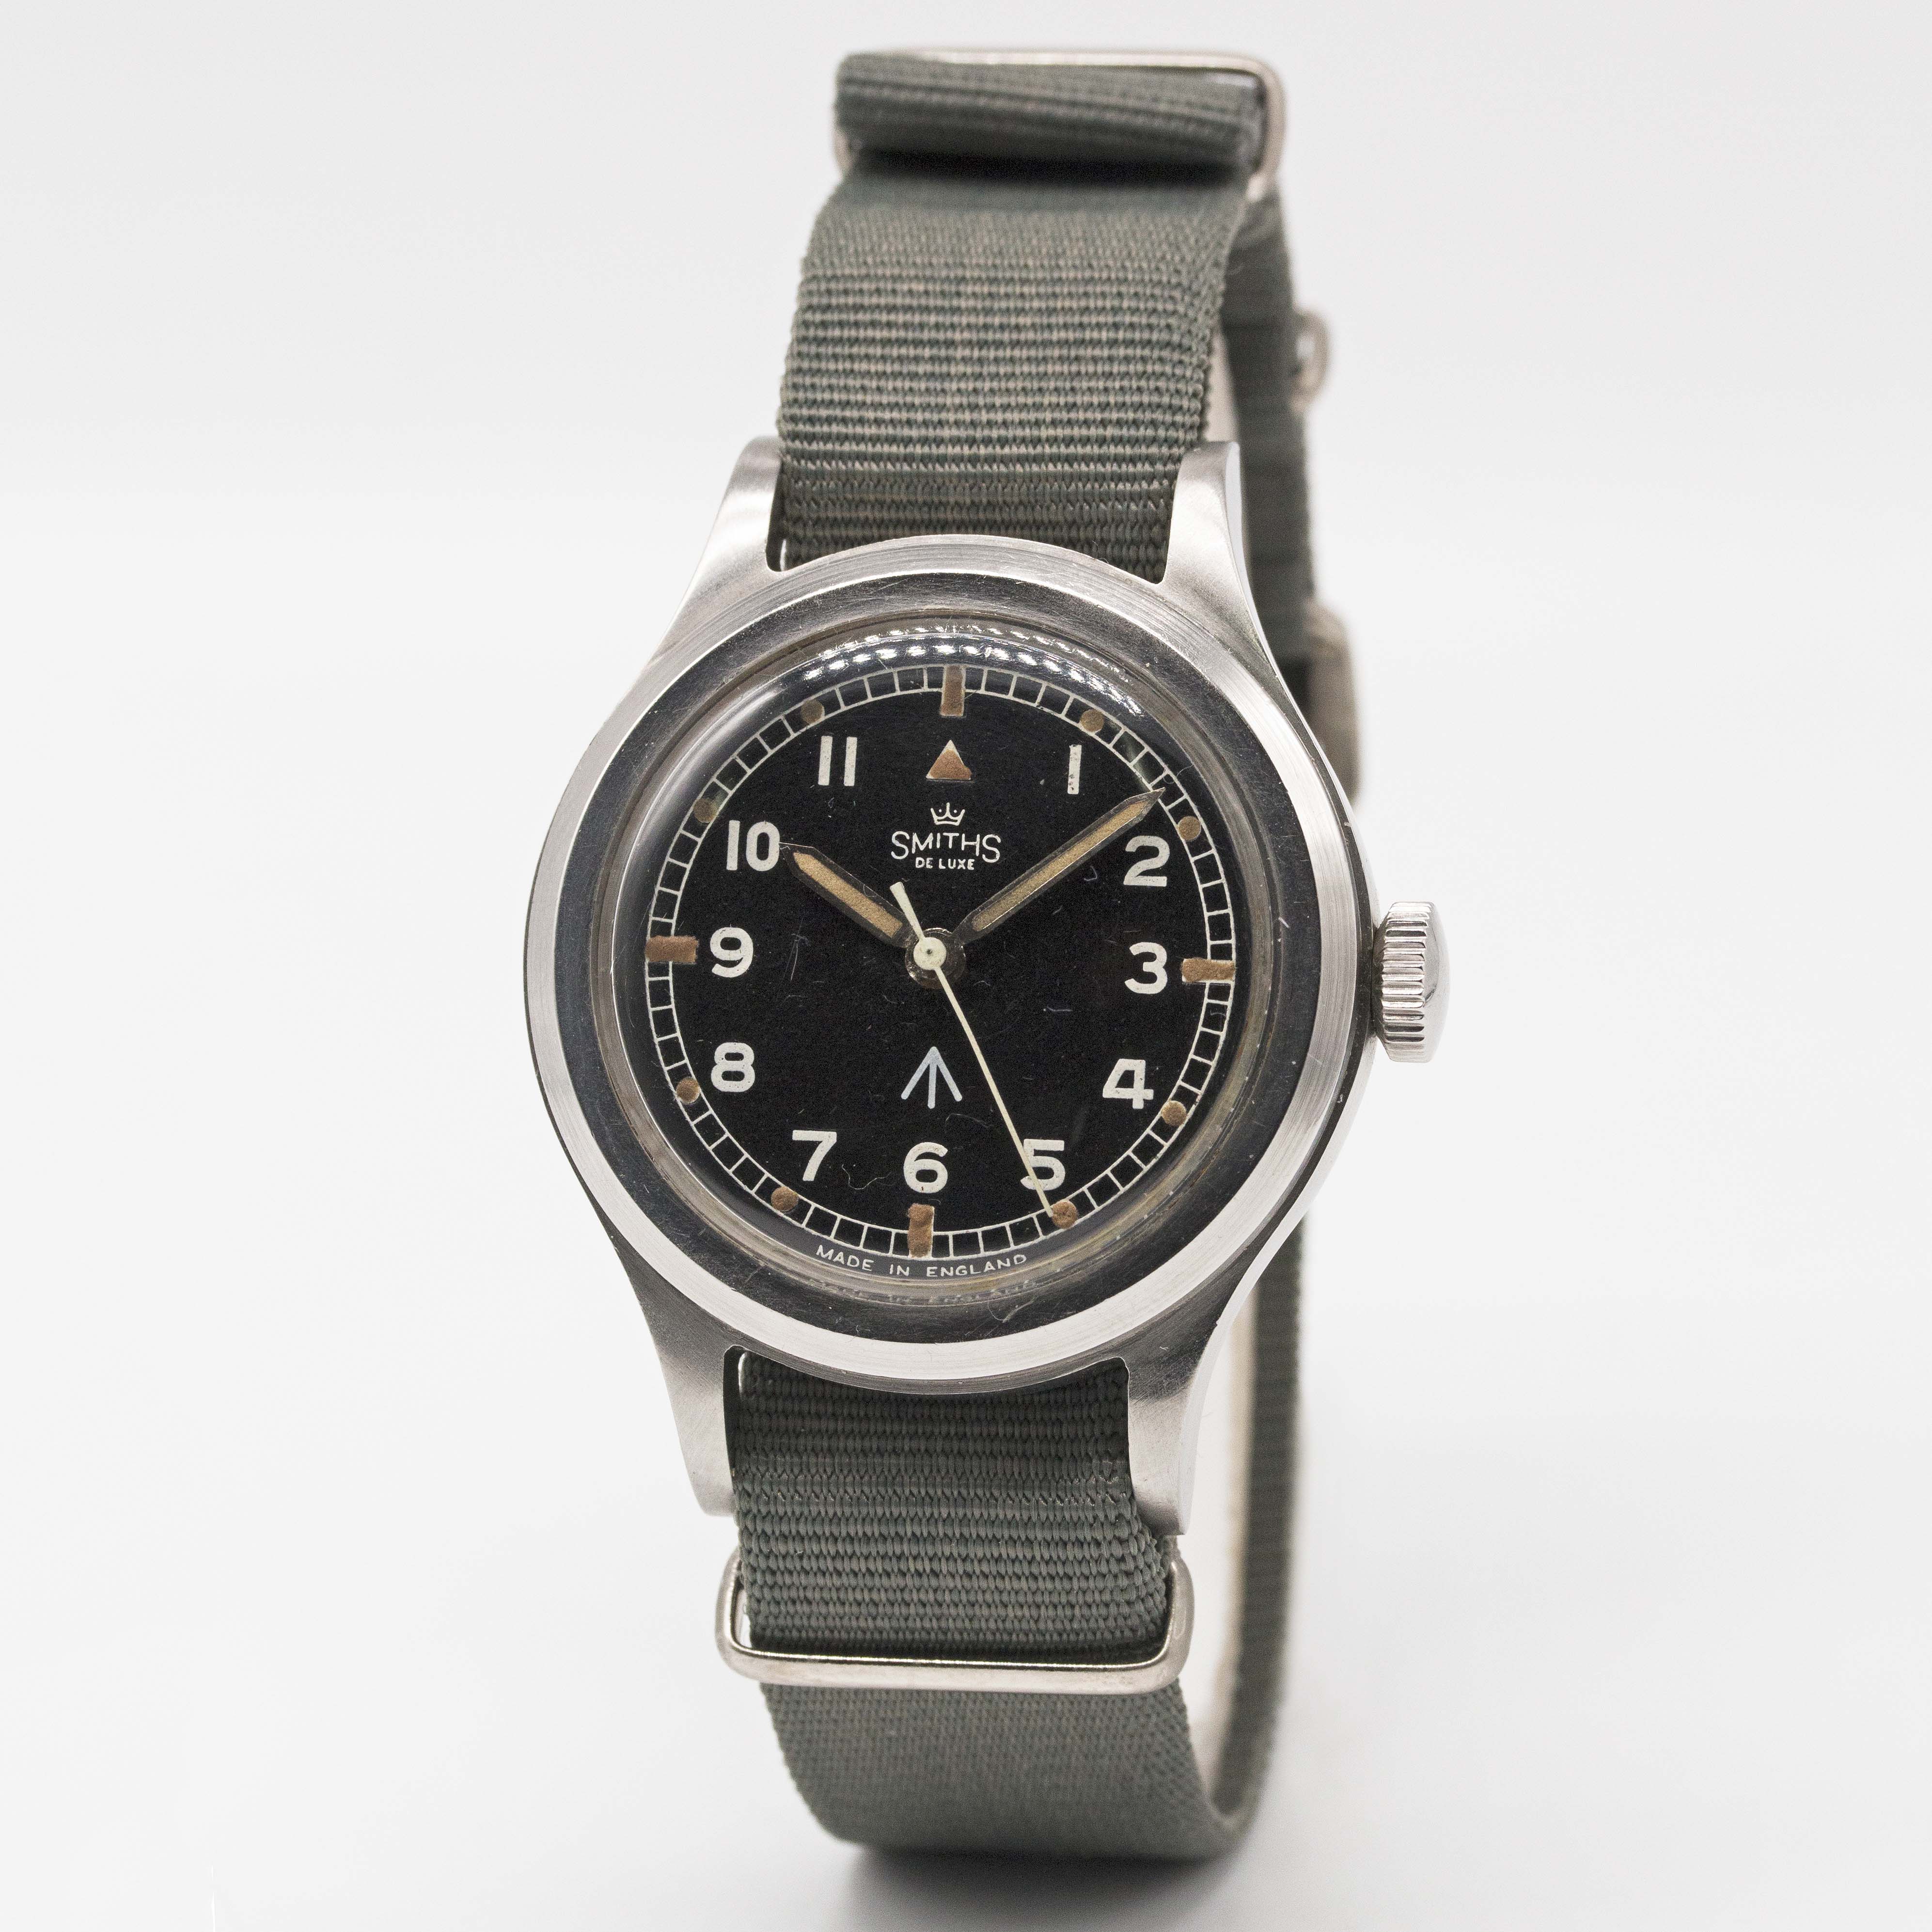 A VERY RARE GENTLEMAN'S STAINLESS STEEL AUSTRALIAN MILITARY SMITHS DE LUXE WRIST WATCH DATED 1961, - Image 5 of 11